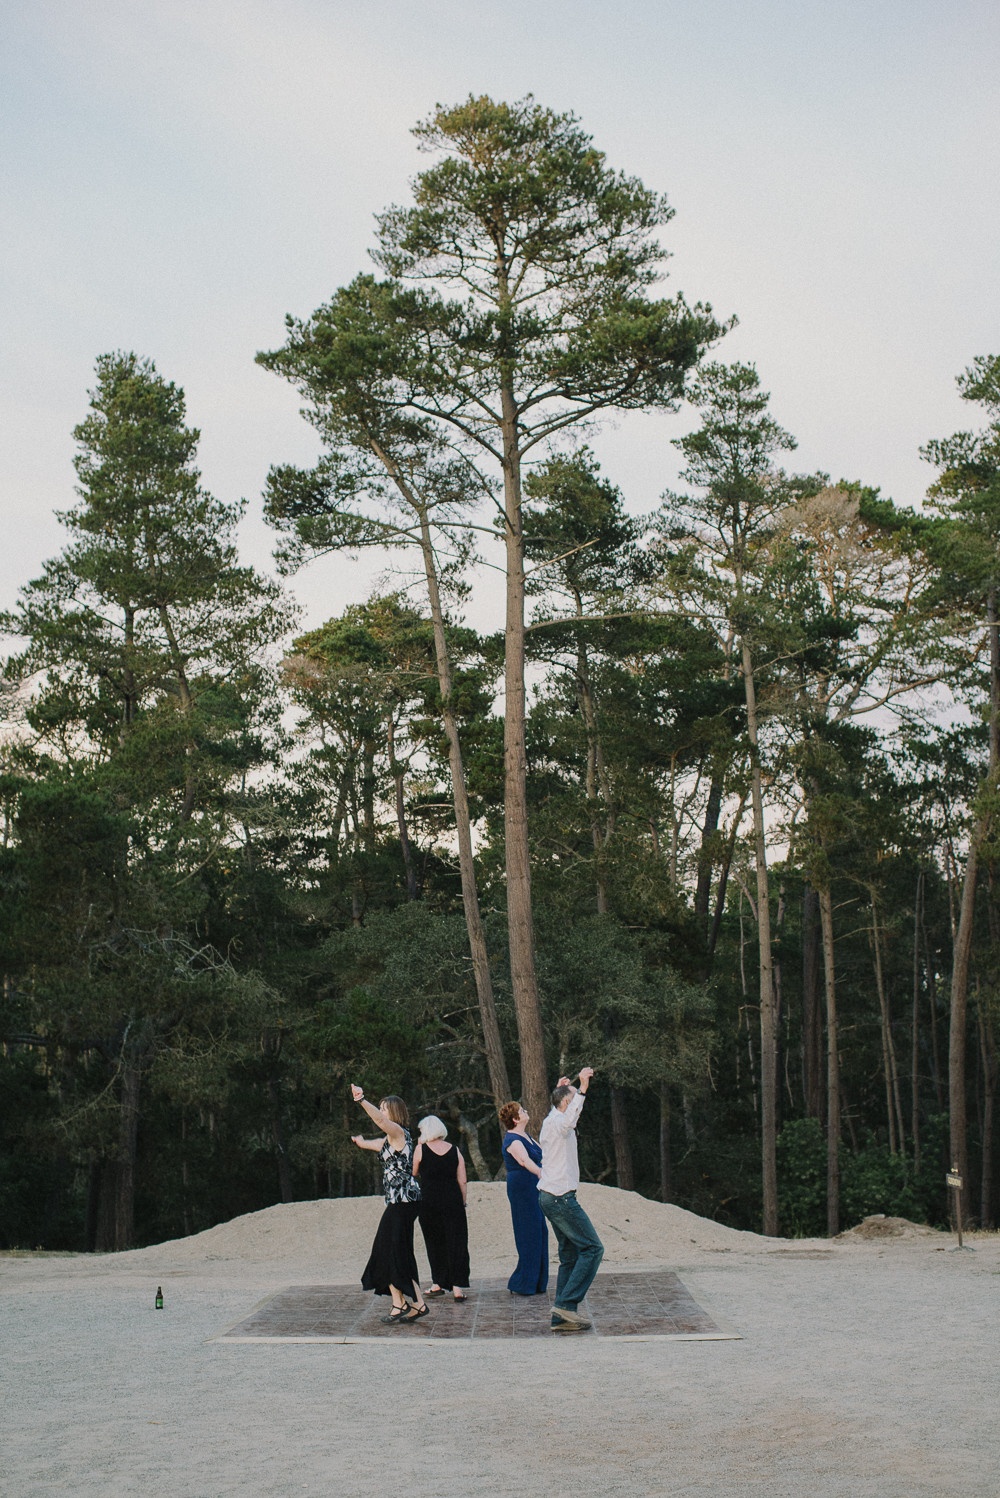 Guests dancing with tall trees behind them